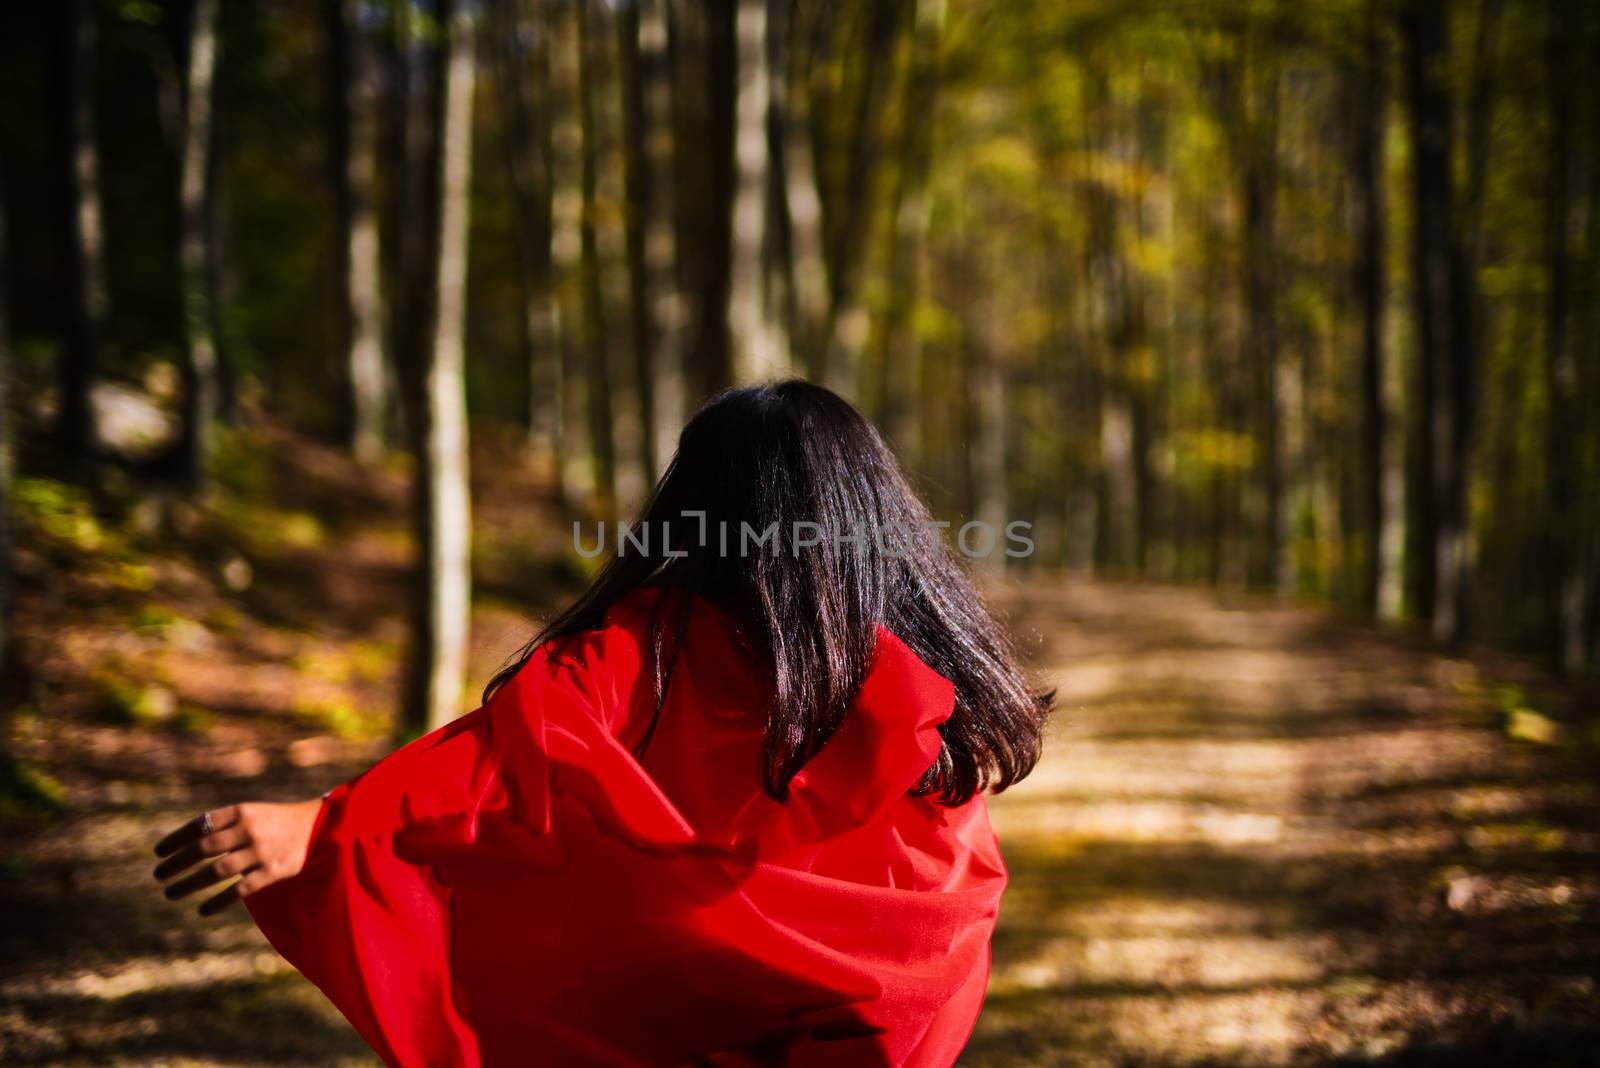 Little Red Riding Hood whit wolf shadow in the woods